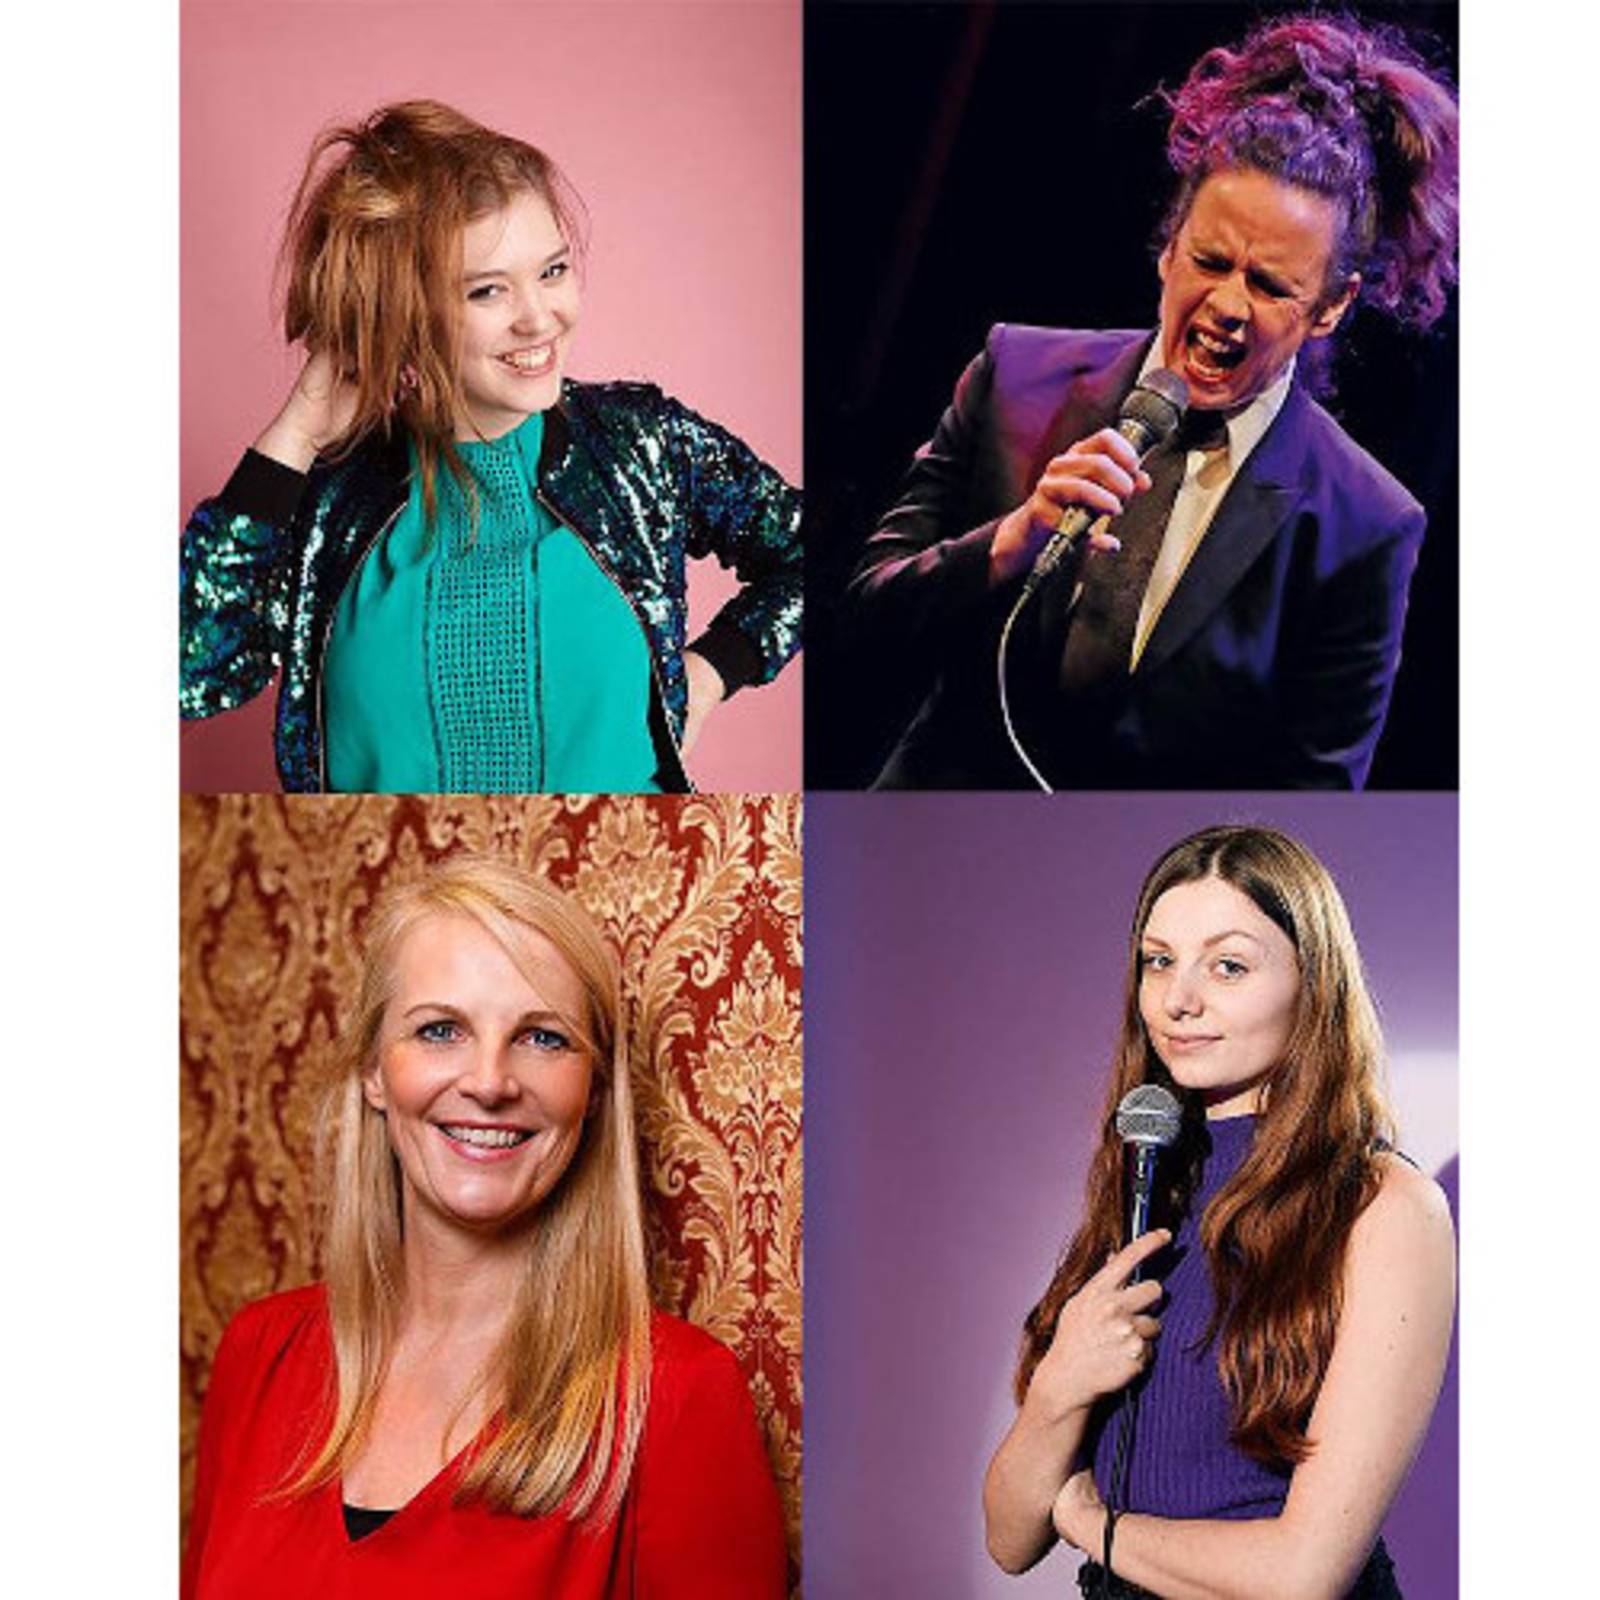 COLOGNE COMEDY LADIES' NIGHT